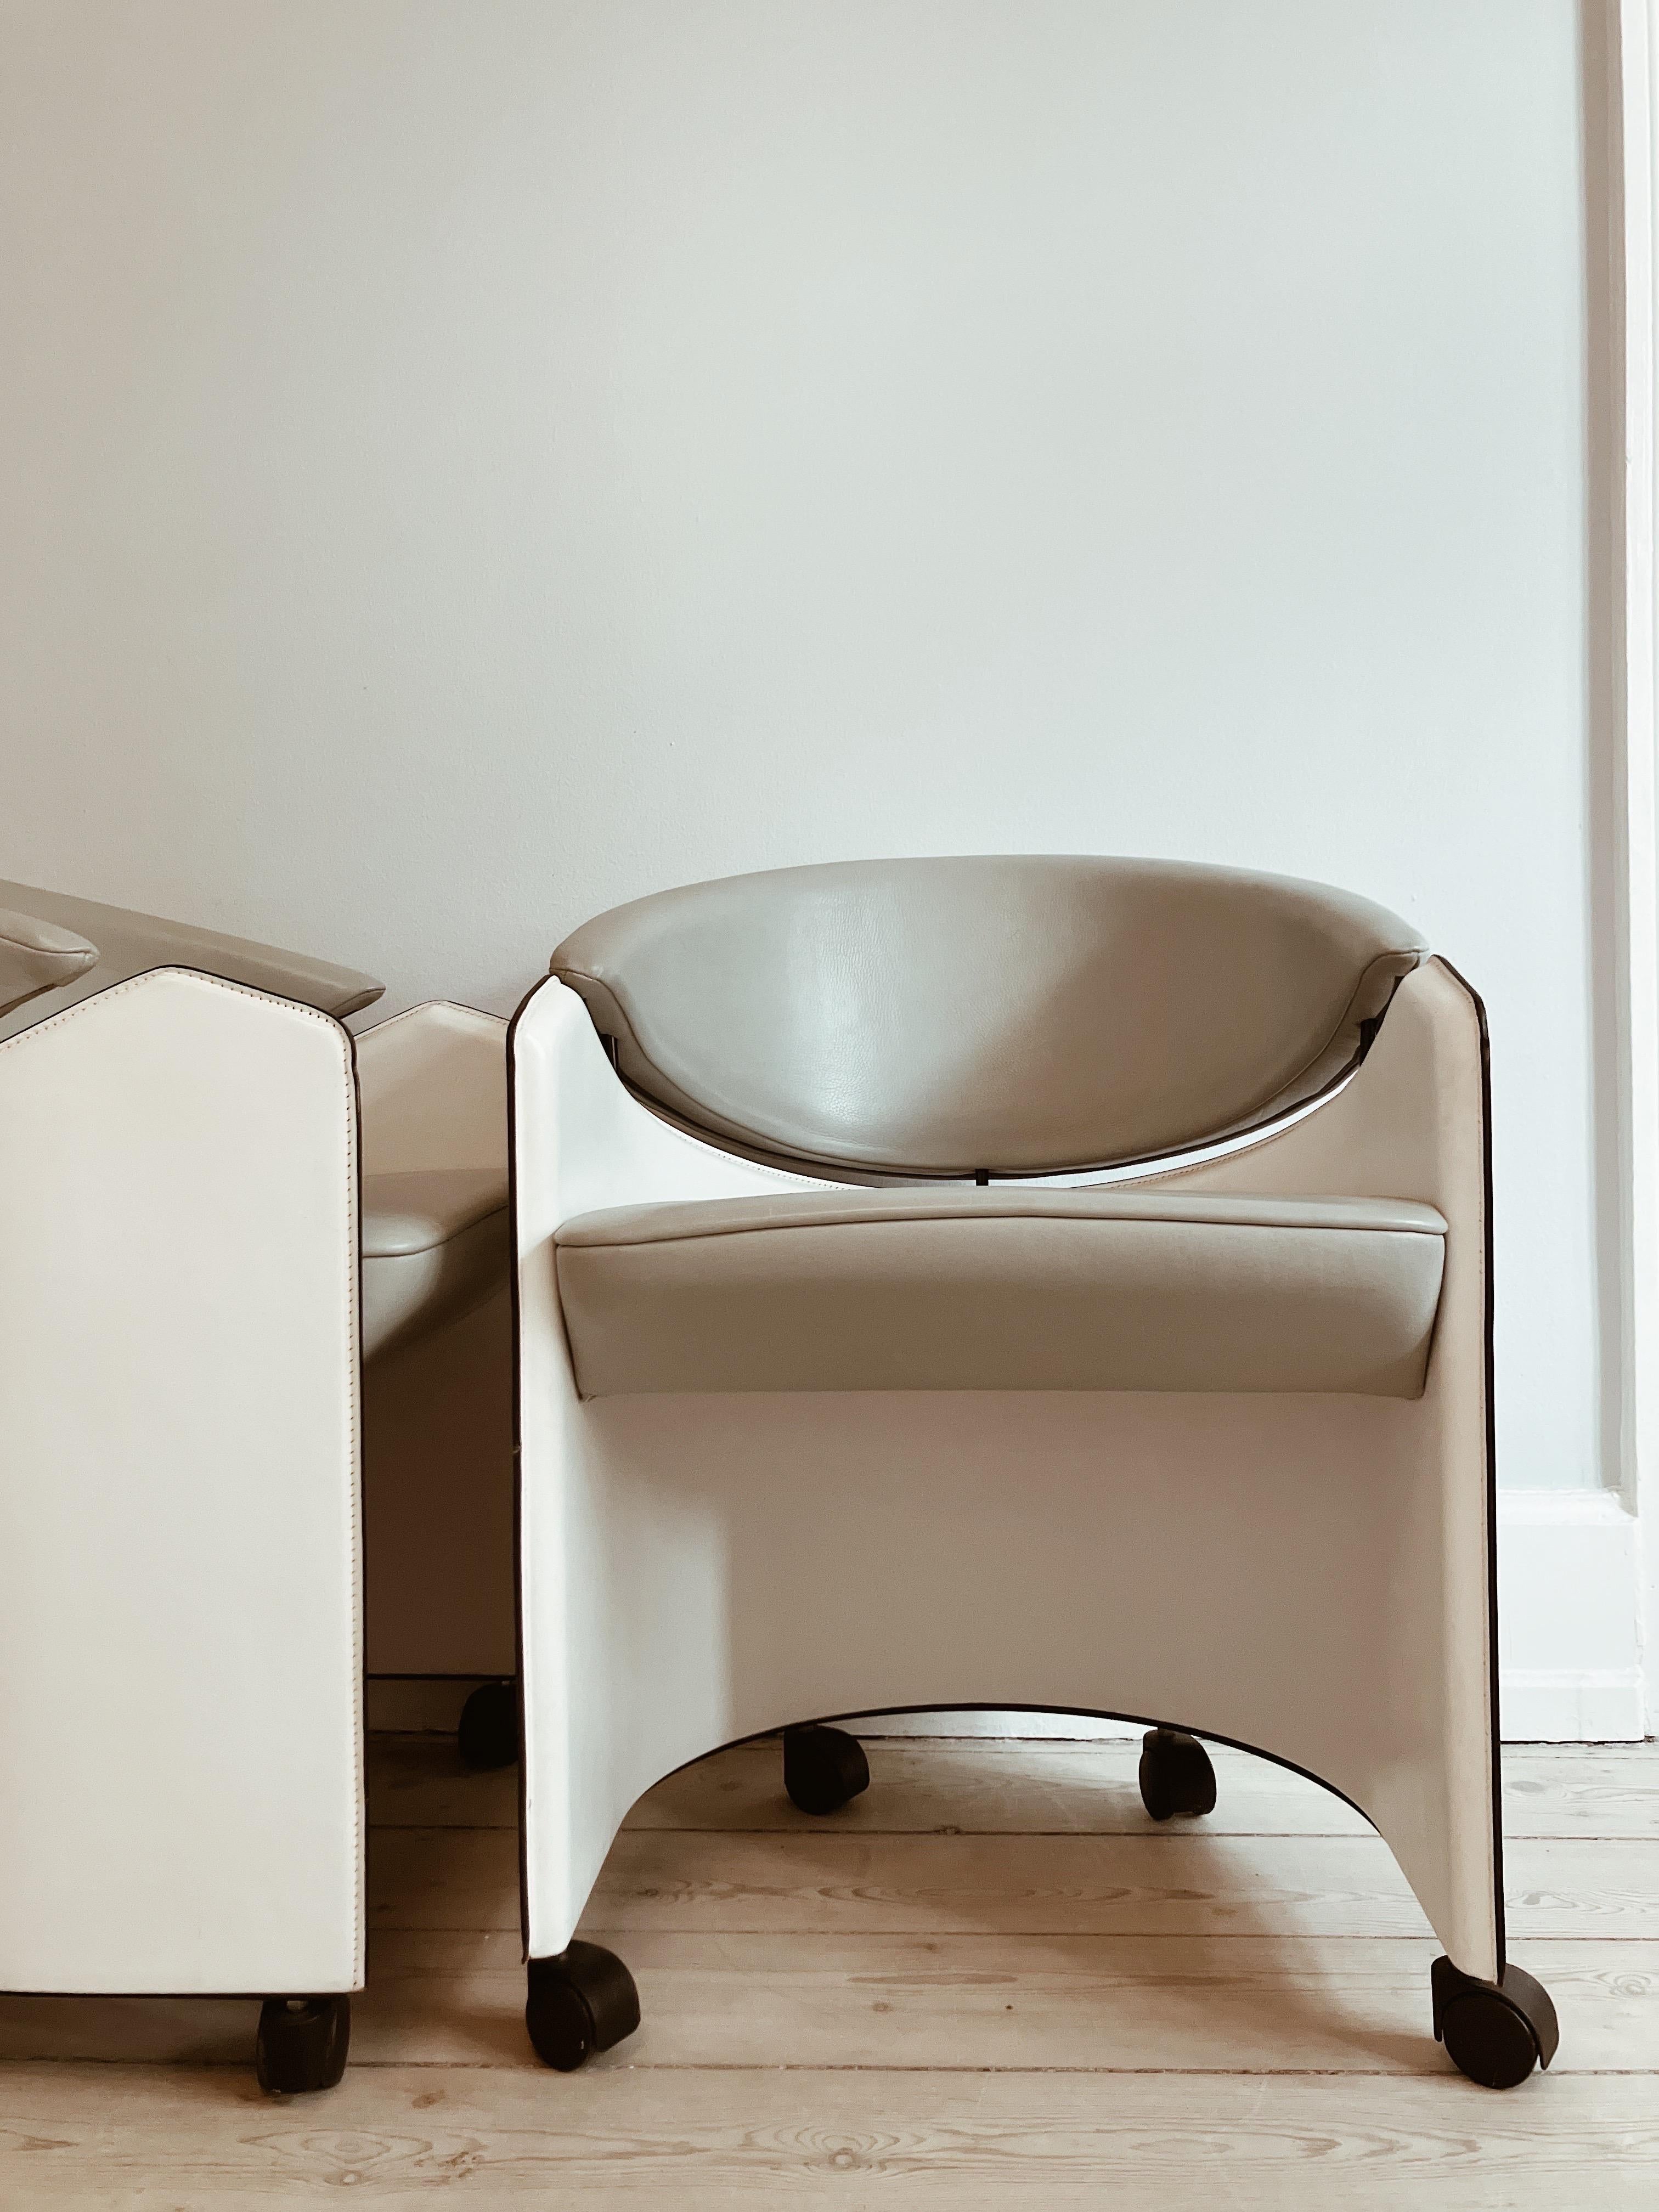 Leather Matteo Grassi - 8 dining chairs  For Sale